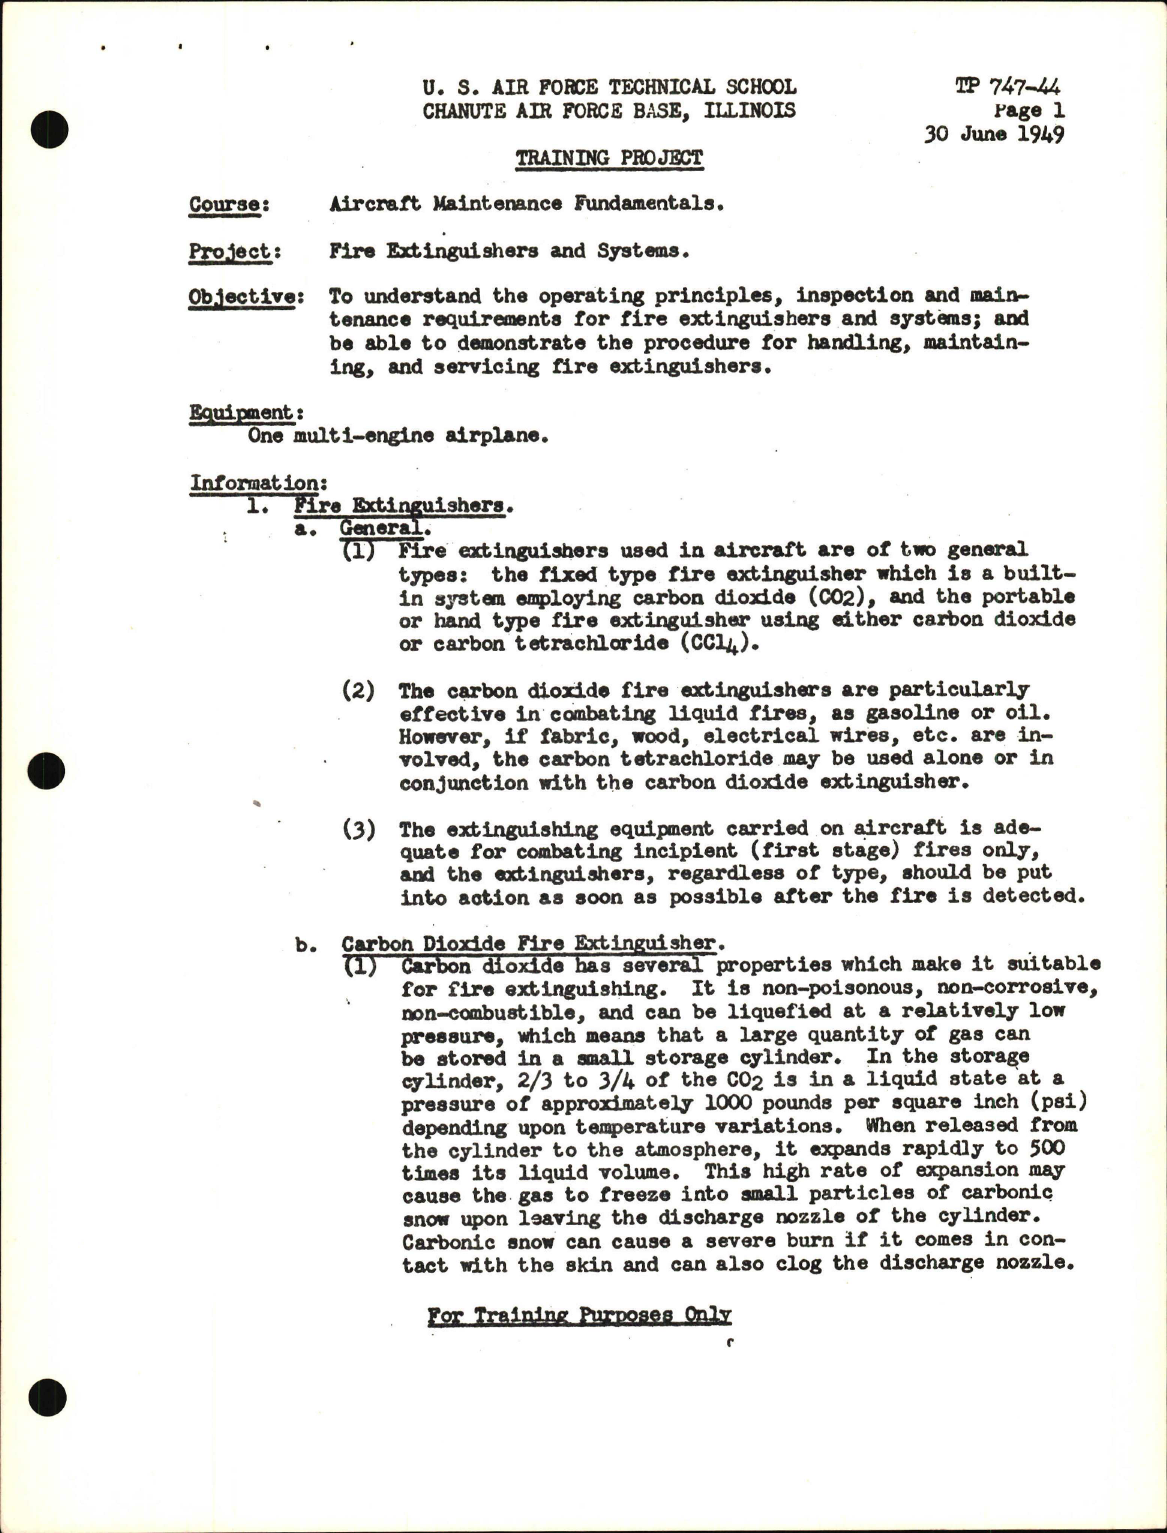 Sample page 1 from AirCorps Library document: Training Project, Fire Extinguishers and Systems